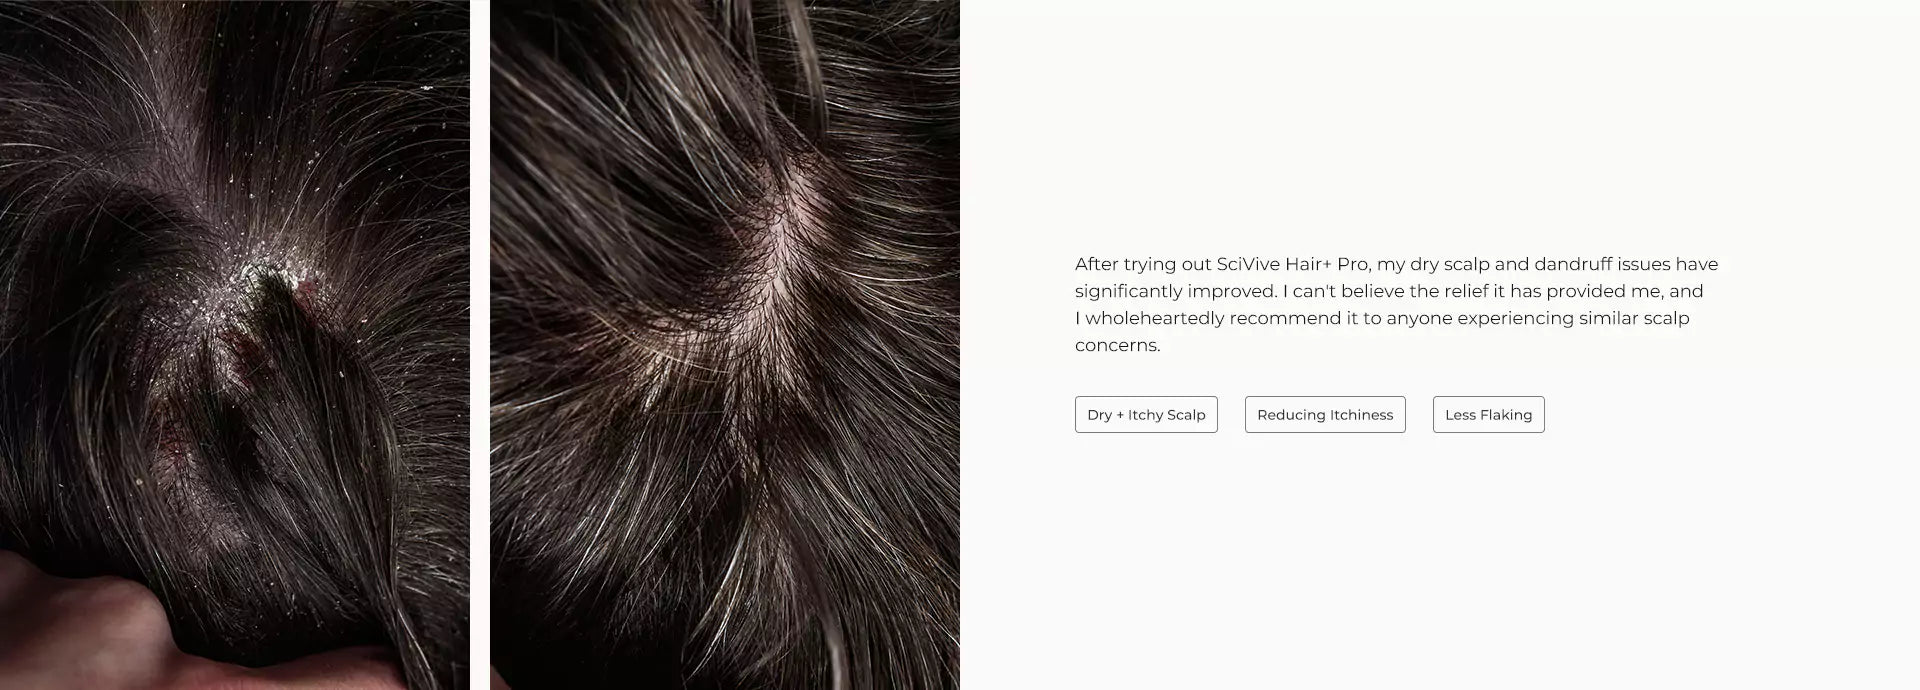 SciVive Hair+ Pro improves the dandruff issues